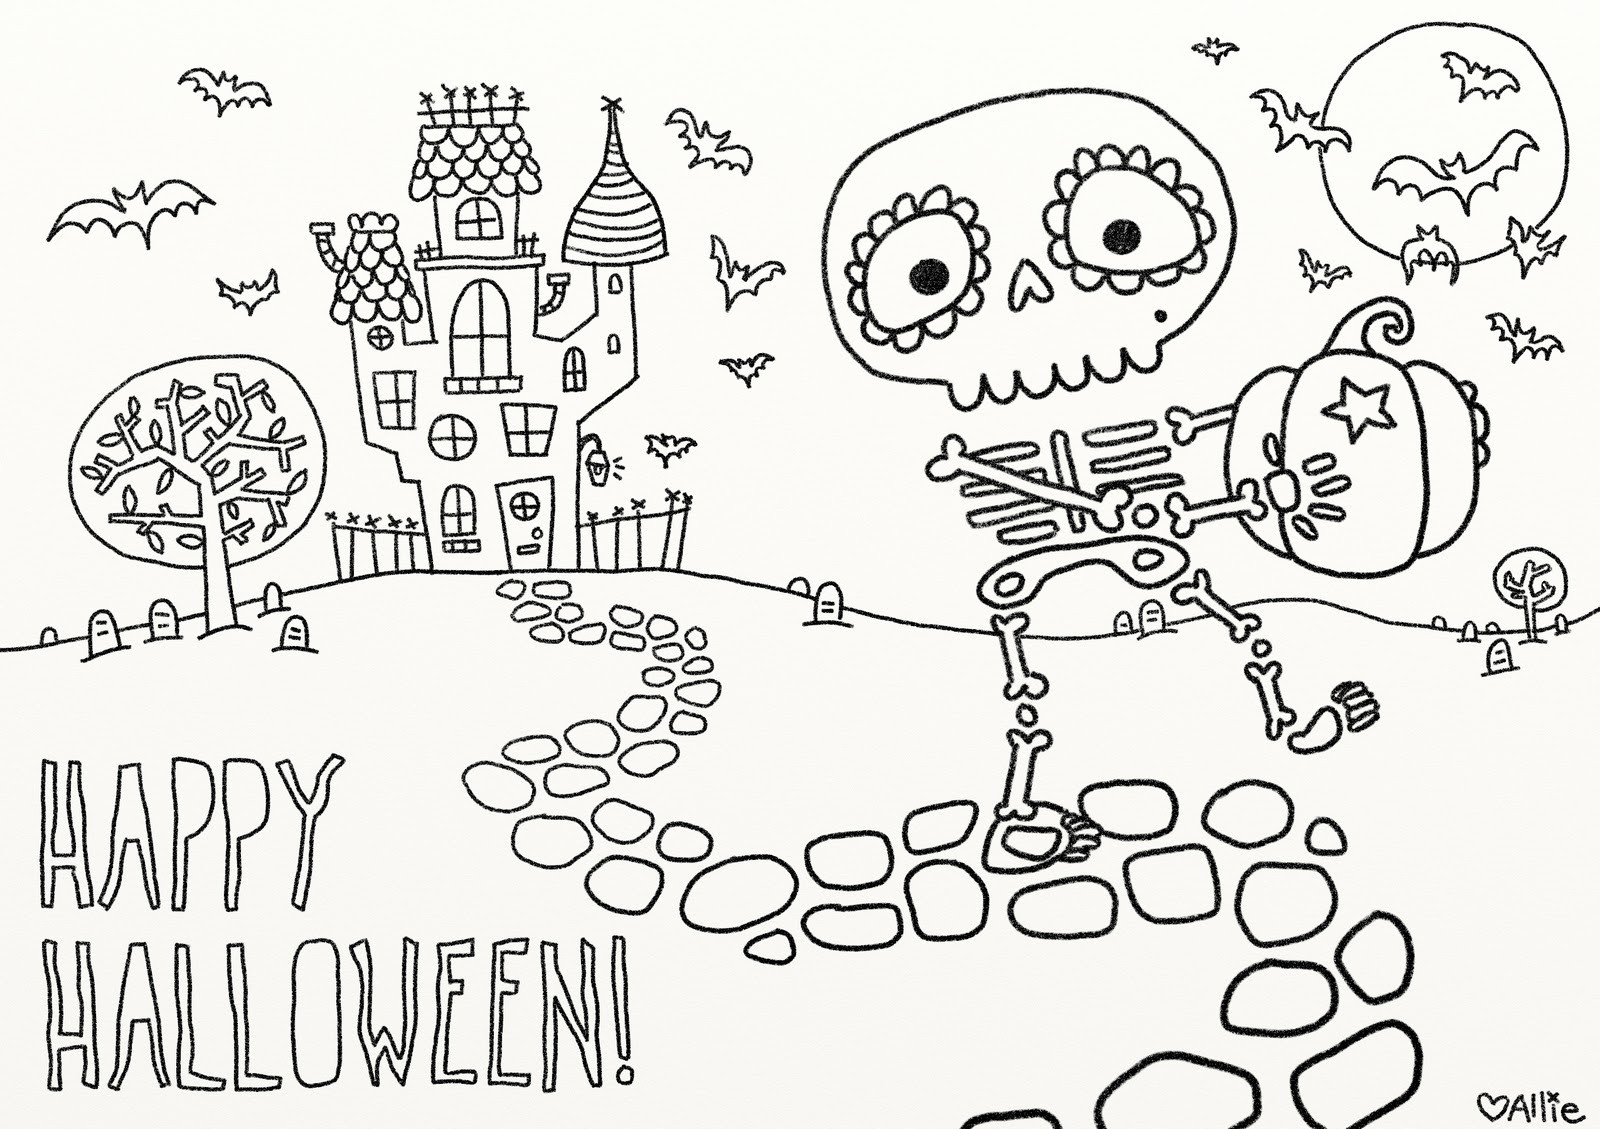 Halloween Coloring Pages Free Printable
 50 Free Printable Halloween Coloring Pages For Kids